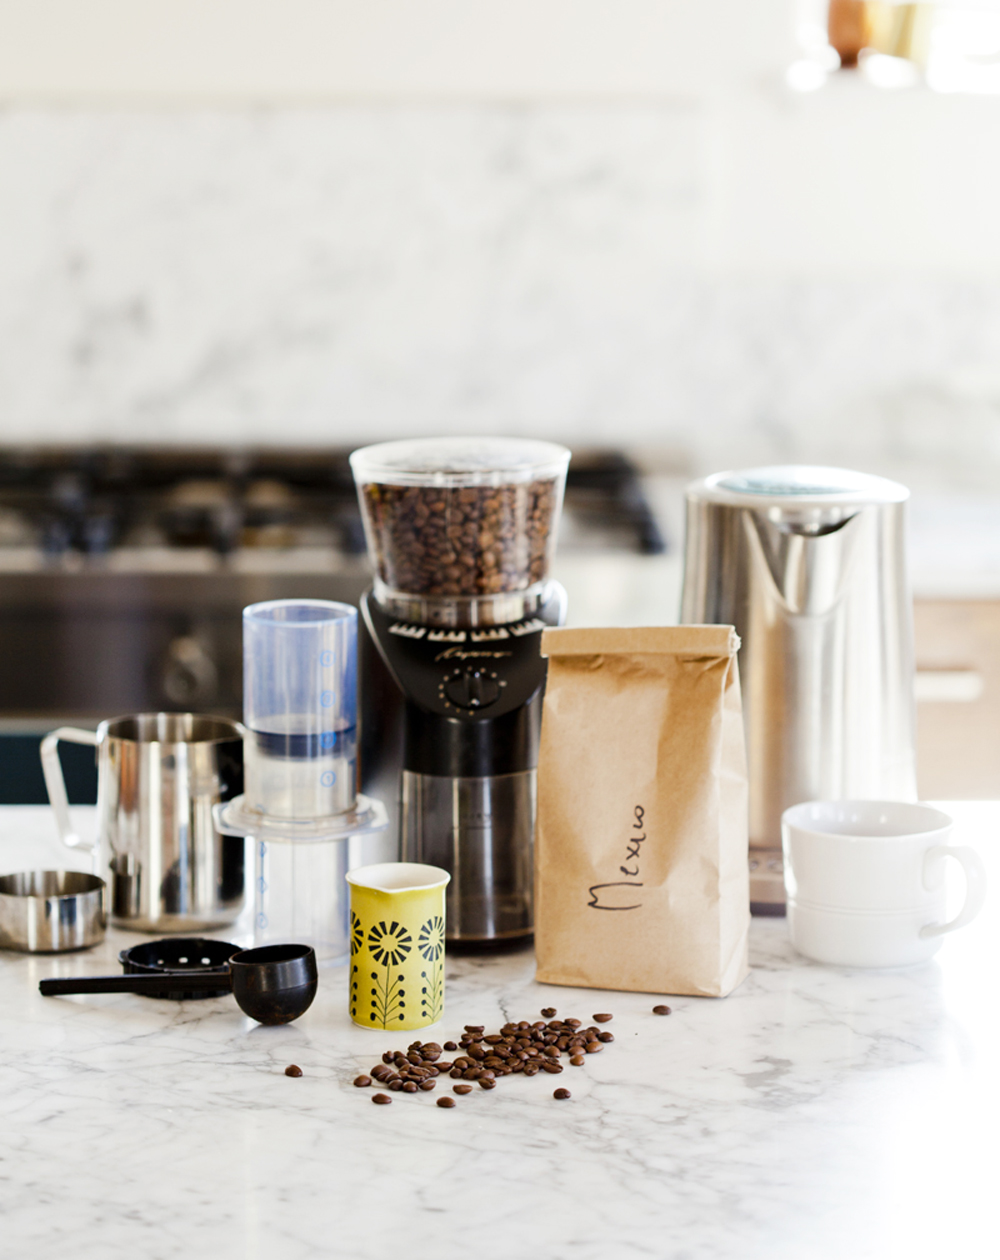 A section in a renovated kitchen entirely dedicated to coffee and accompanying appliances